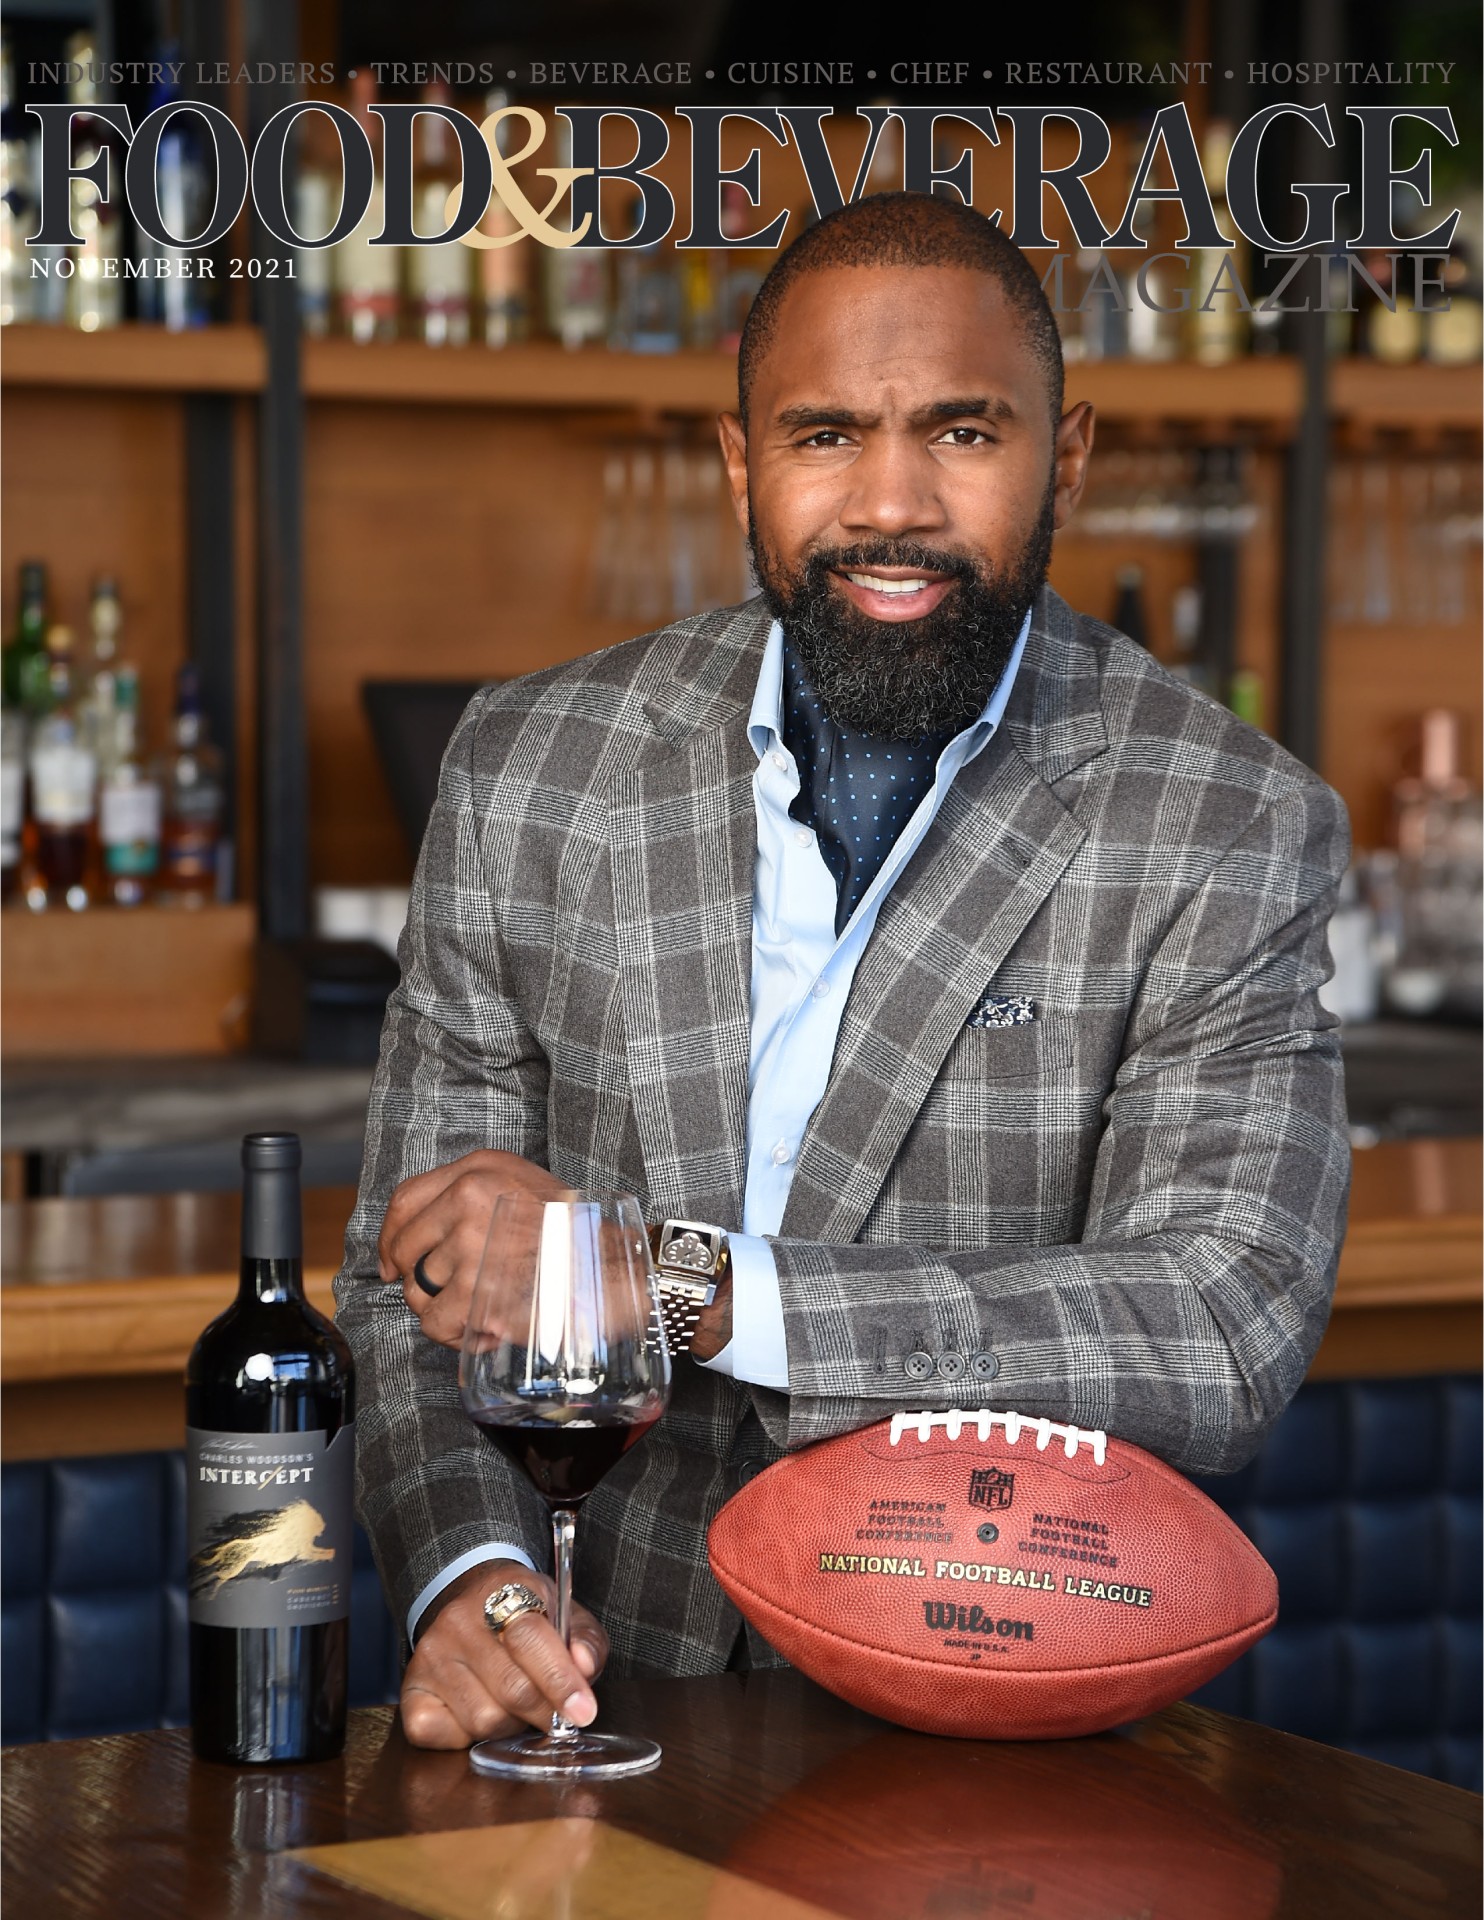 Charles Woodson's longevity continues to impress